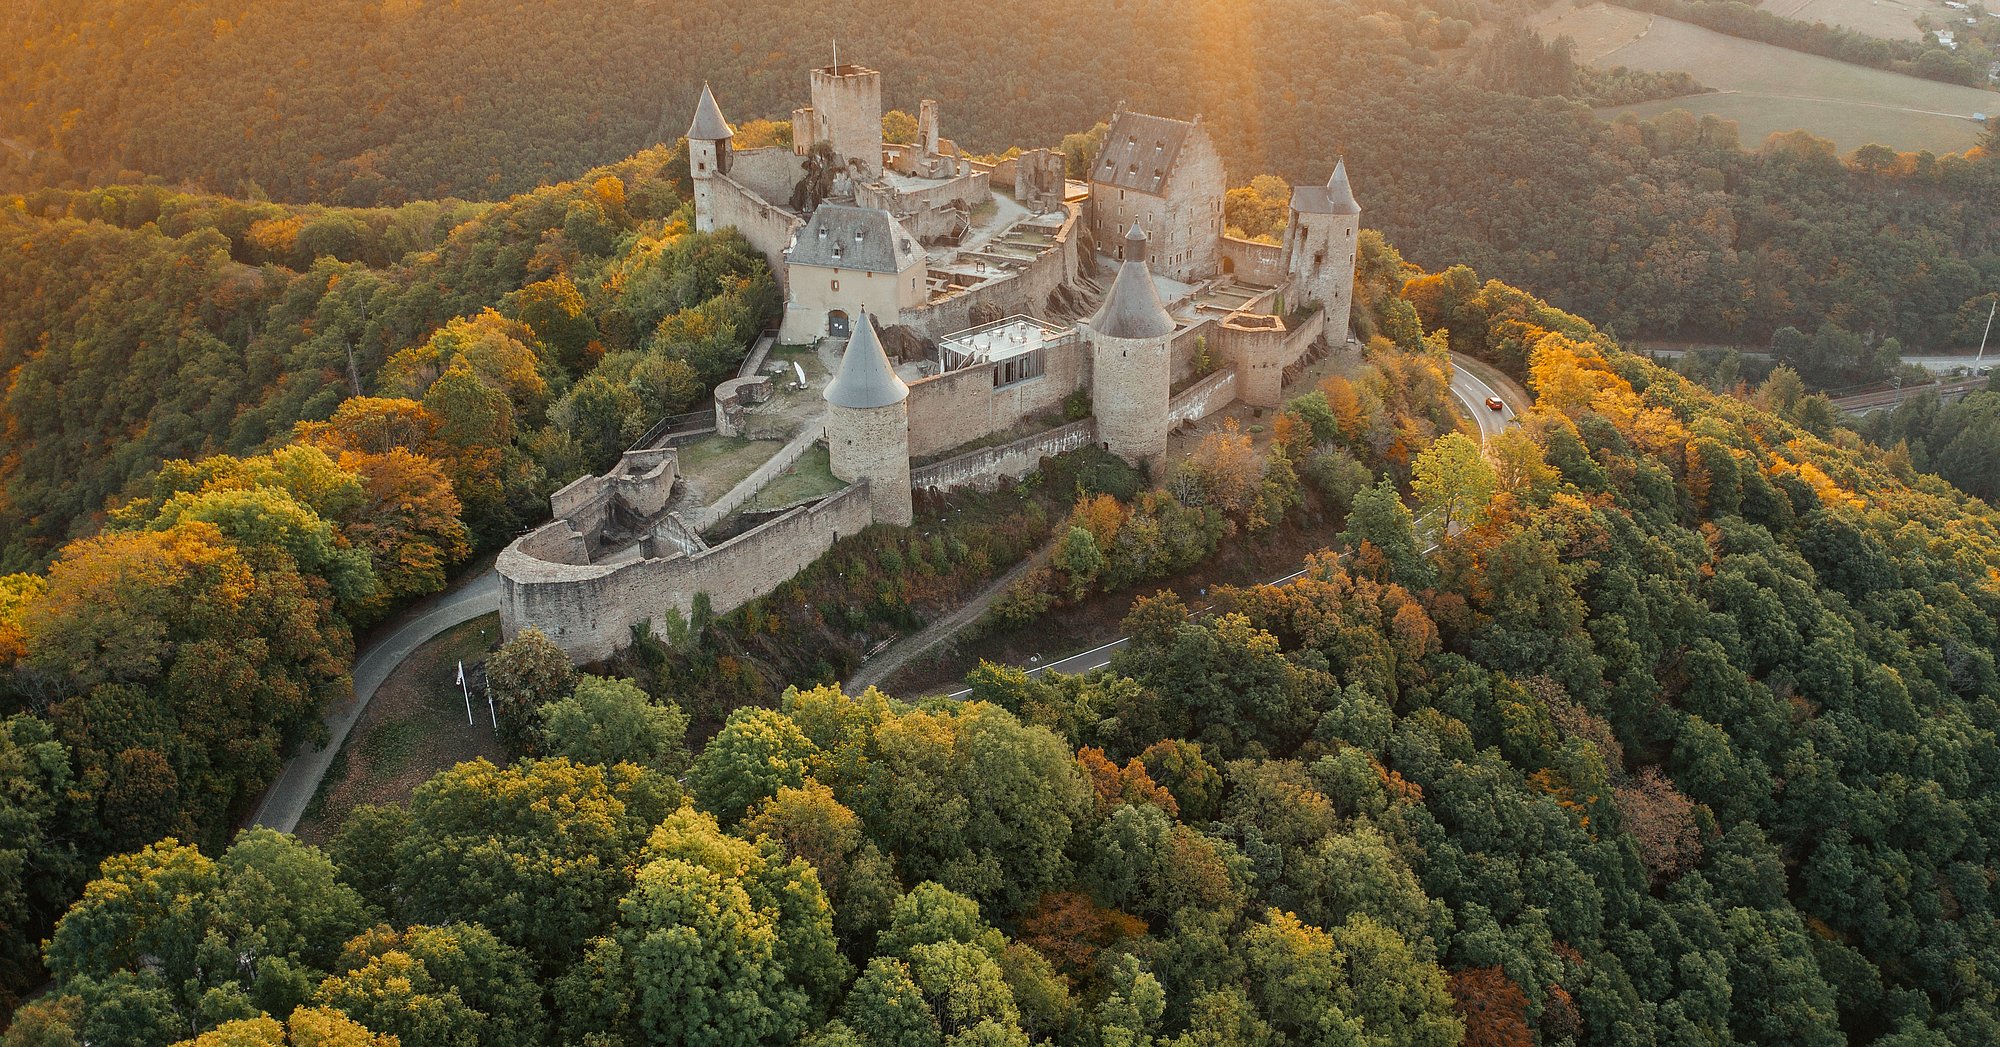 luxembourg castles to visit